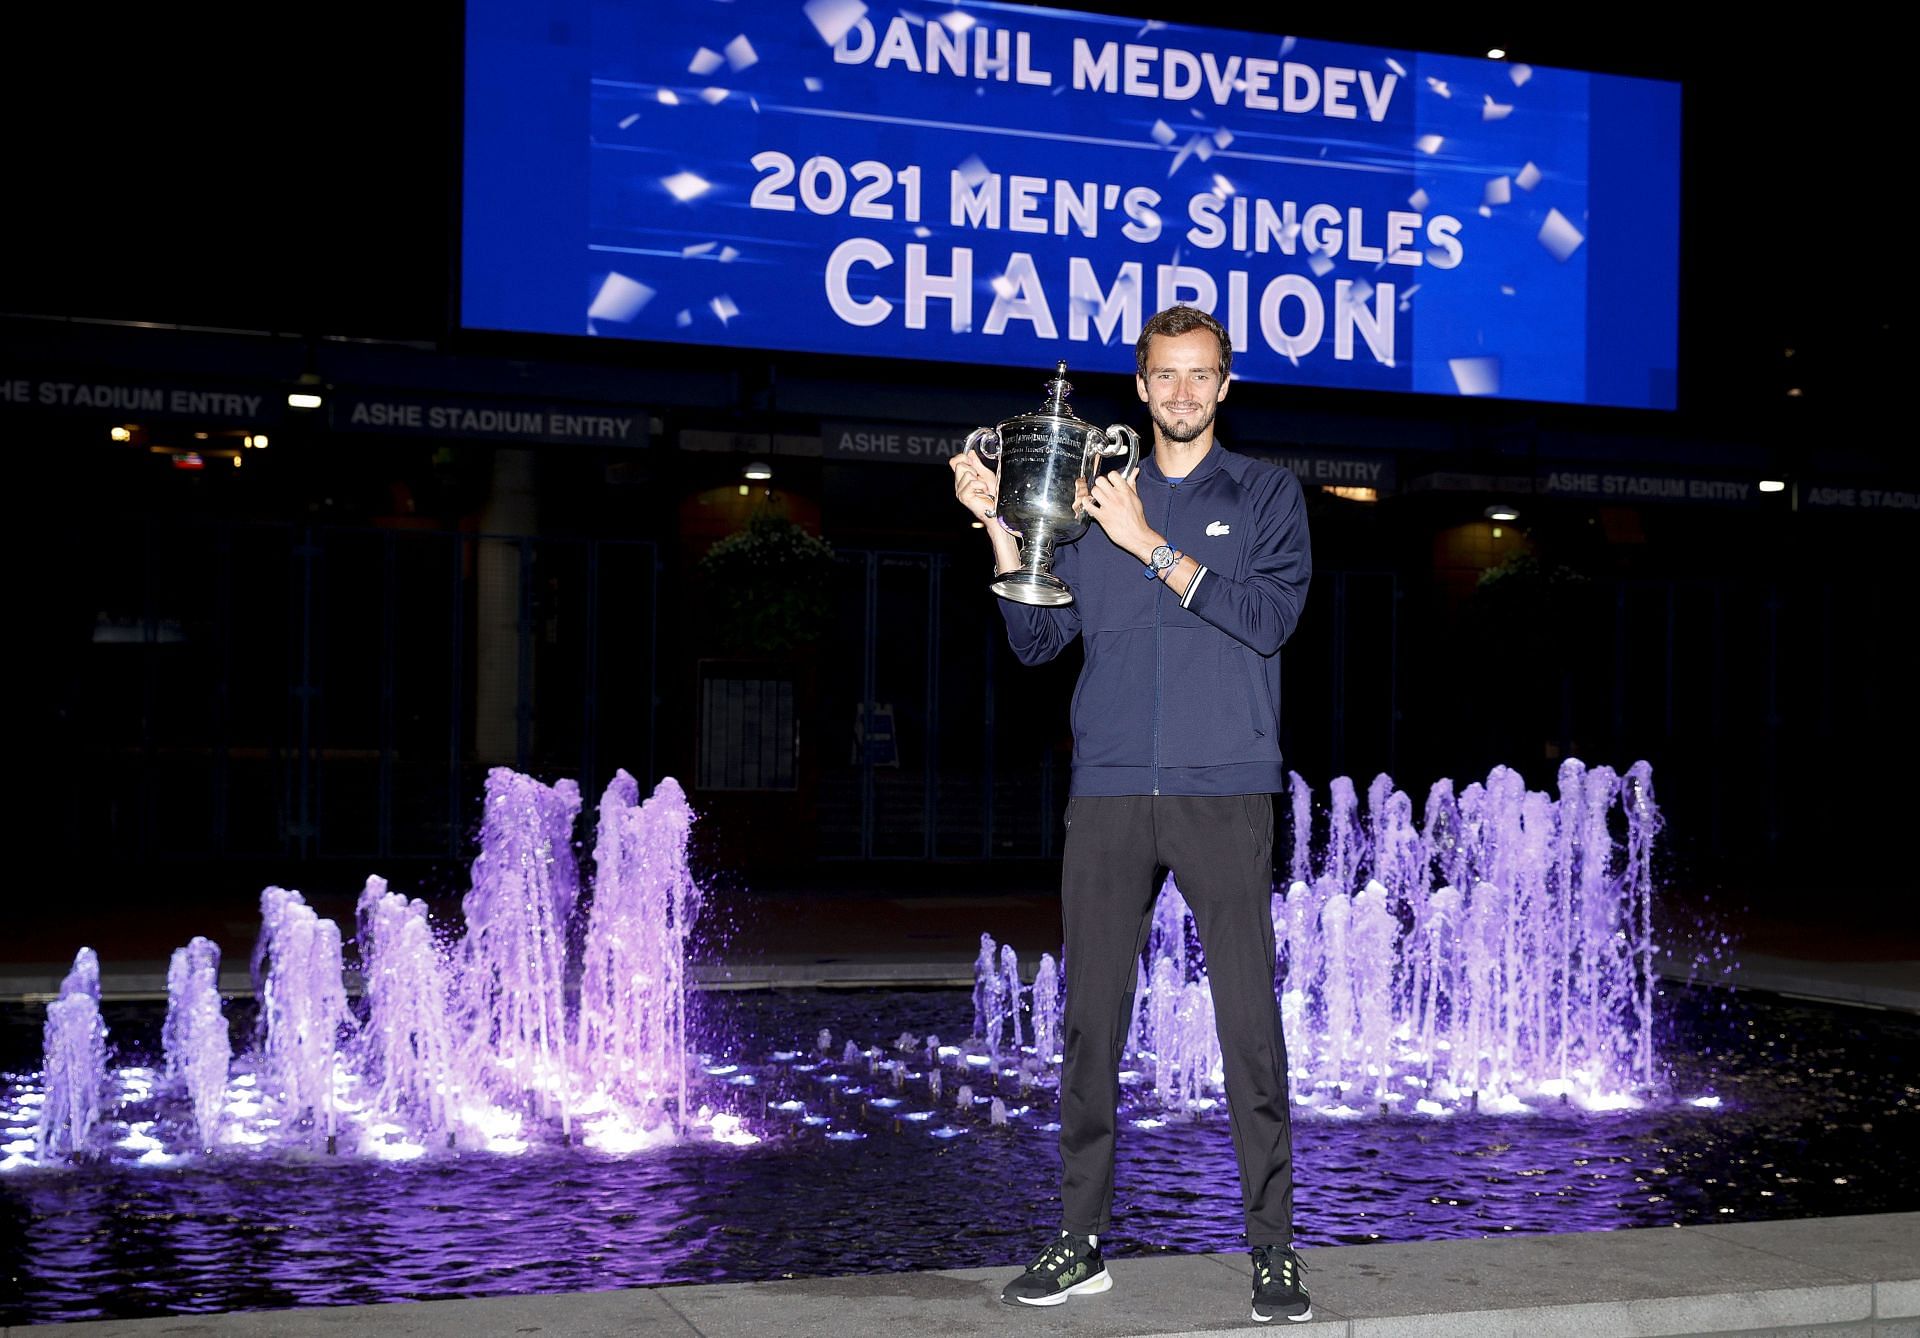 Daniil Medvedev with his 2021 US Open title